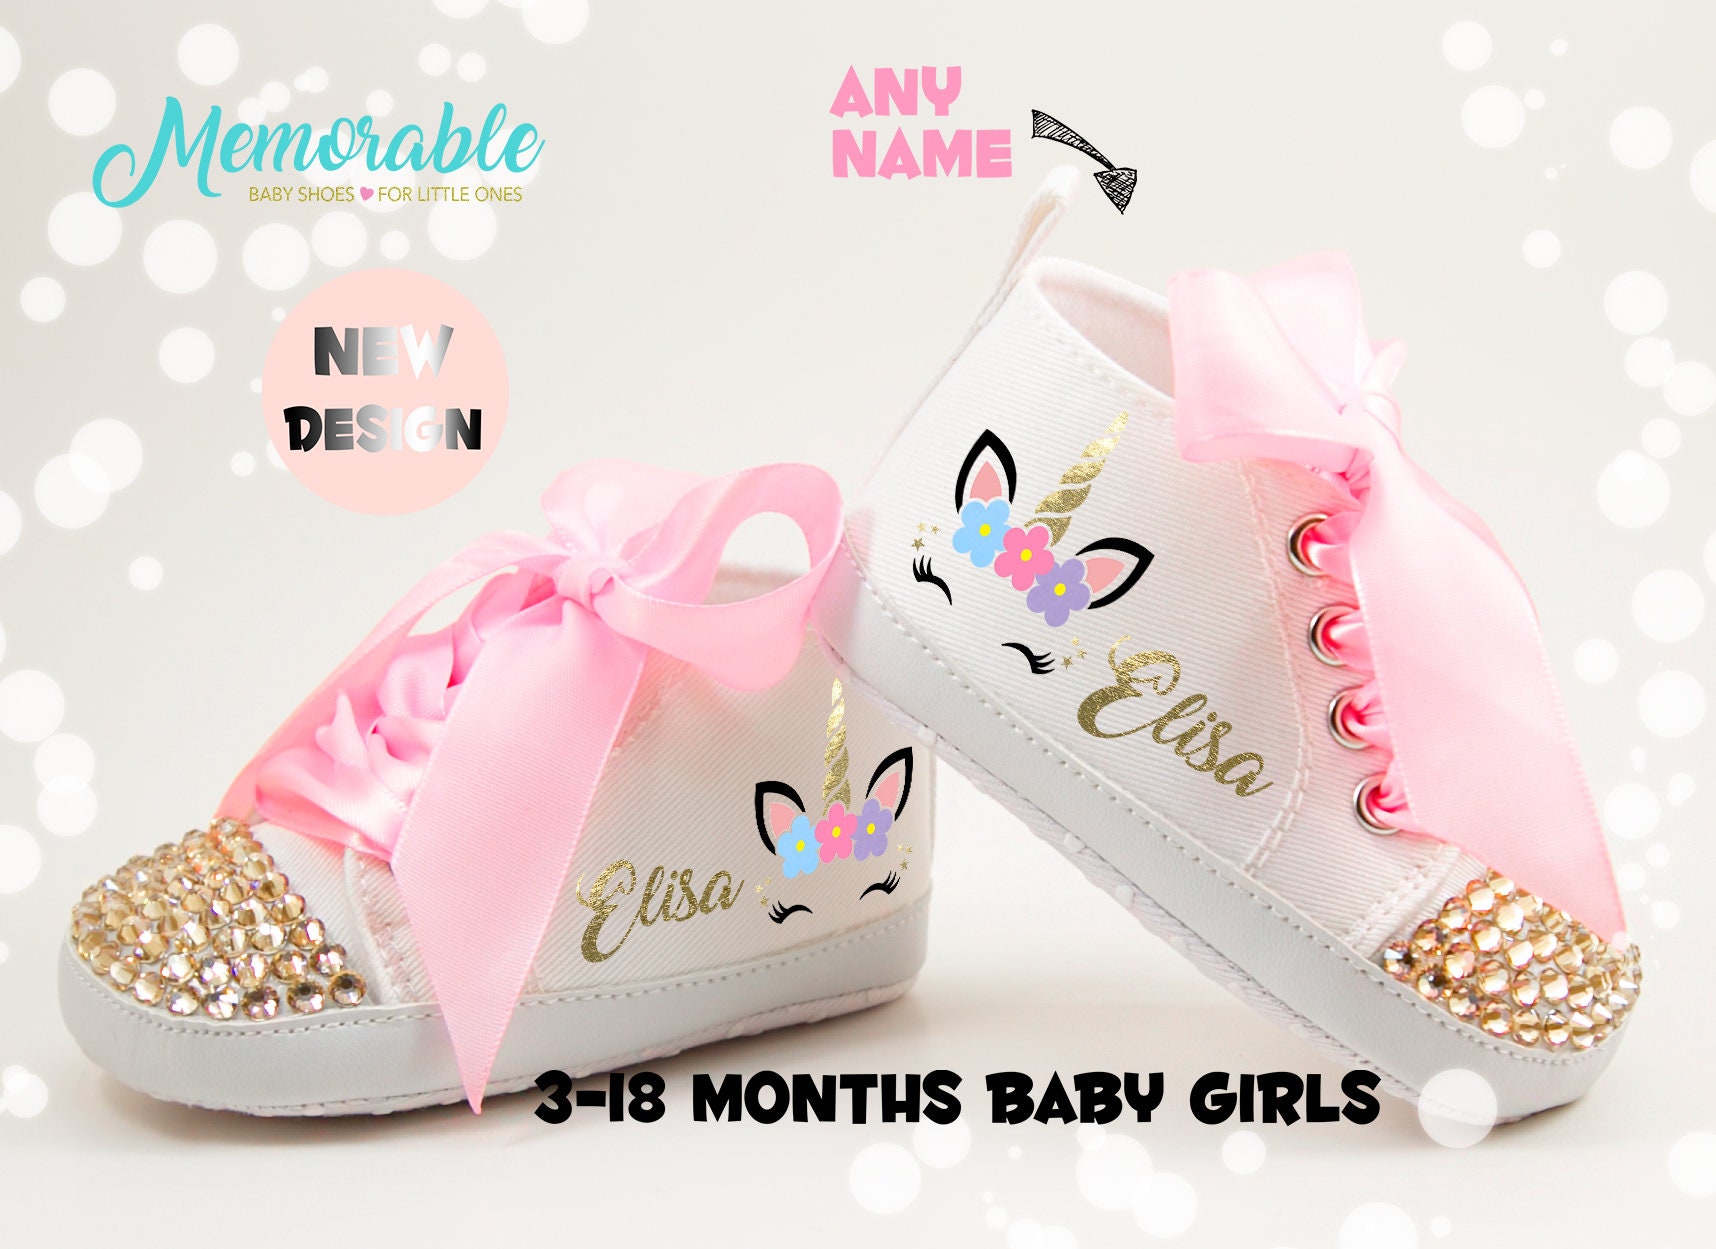 white Baby girl shoes rose gold gray toddler Shoes Girls Shoes Booties & Cot Shoes sparkly rhinestone ballerina baby shoes in gold infant shower gift for little princess 